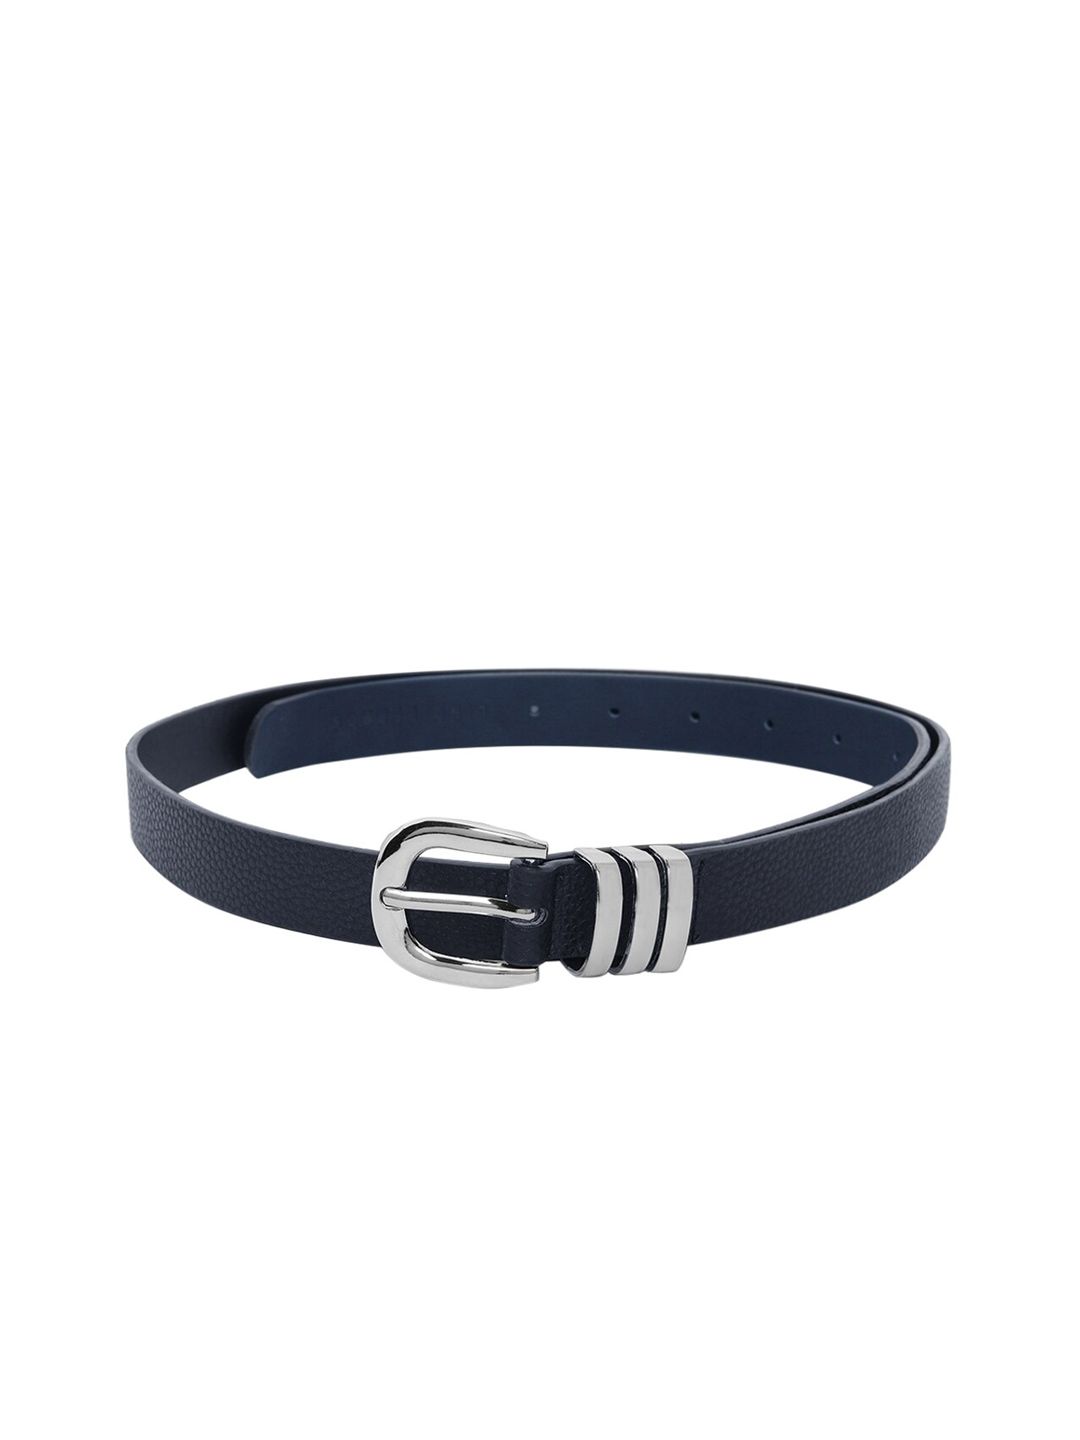 Lino Perros Women Navy Blue Solid Belt Price in India